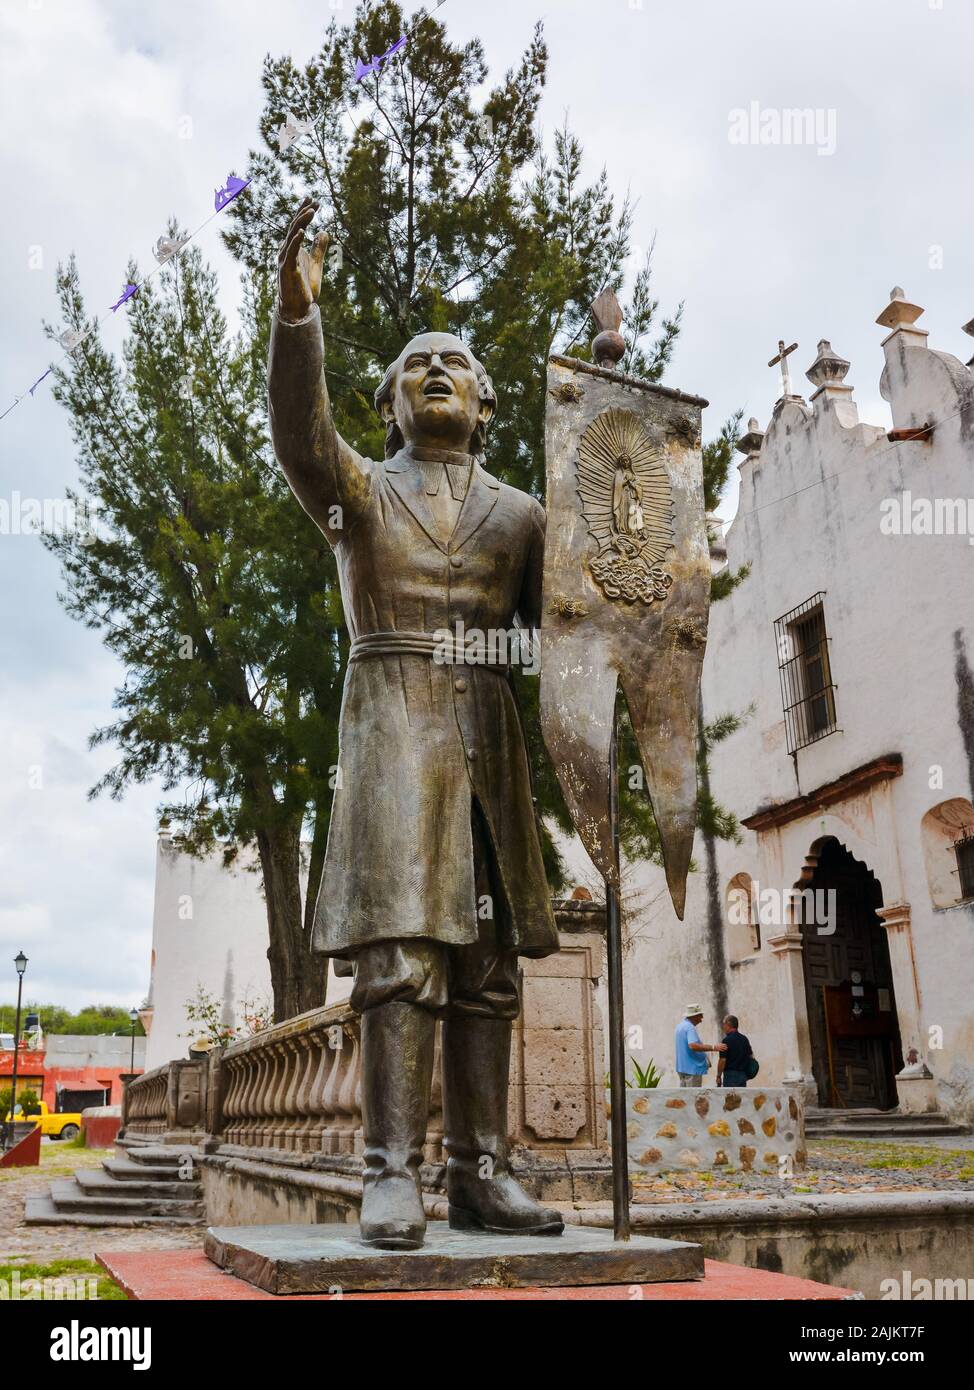 Statue of Don Miguel Hidalgo y Costilla, a Mexican Roman Catholic priest and a leader of the Mexican War of Independence. Stock Photo